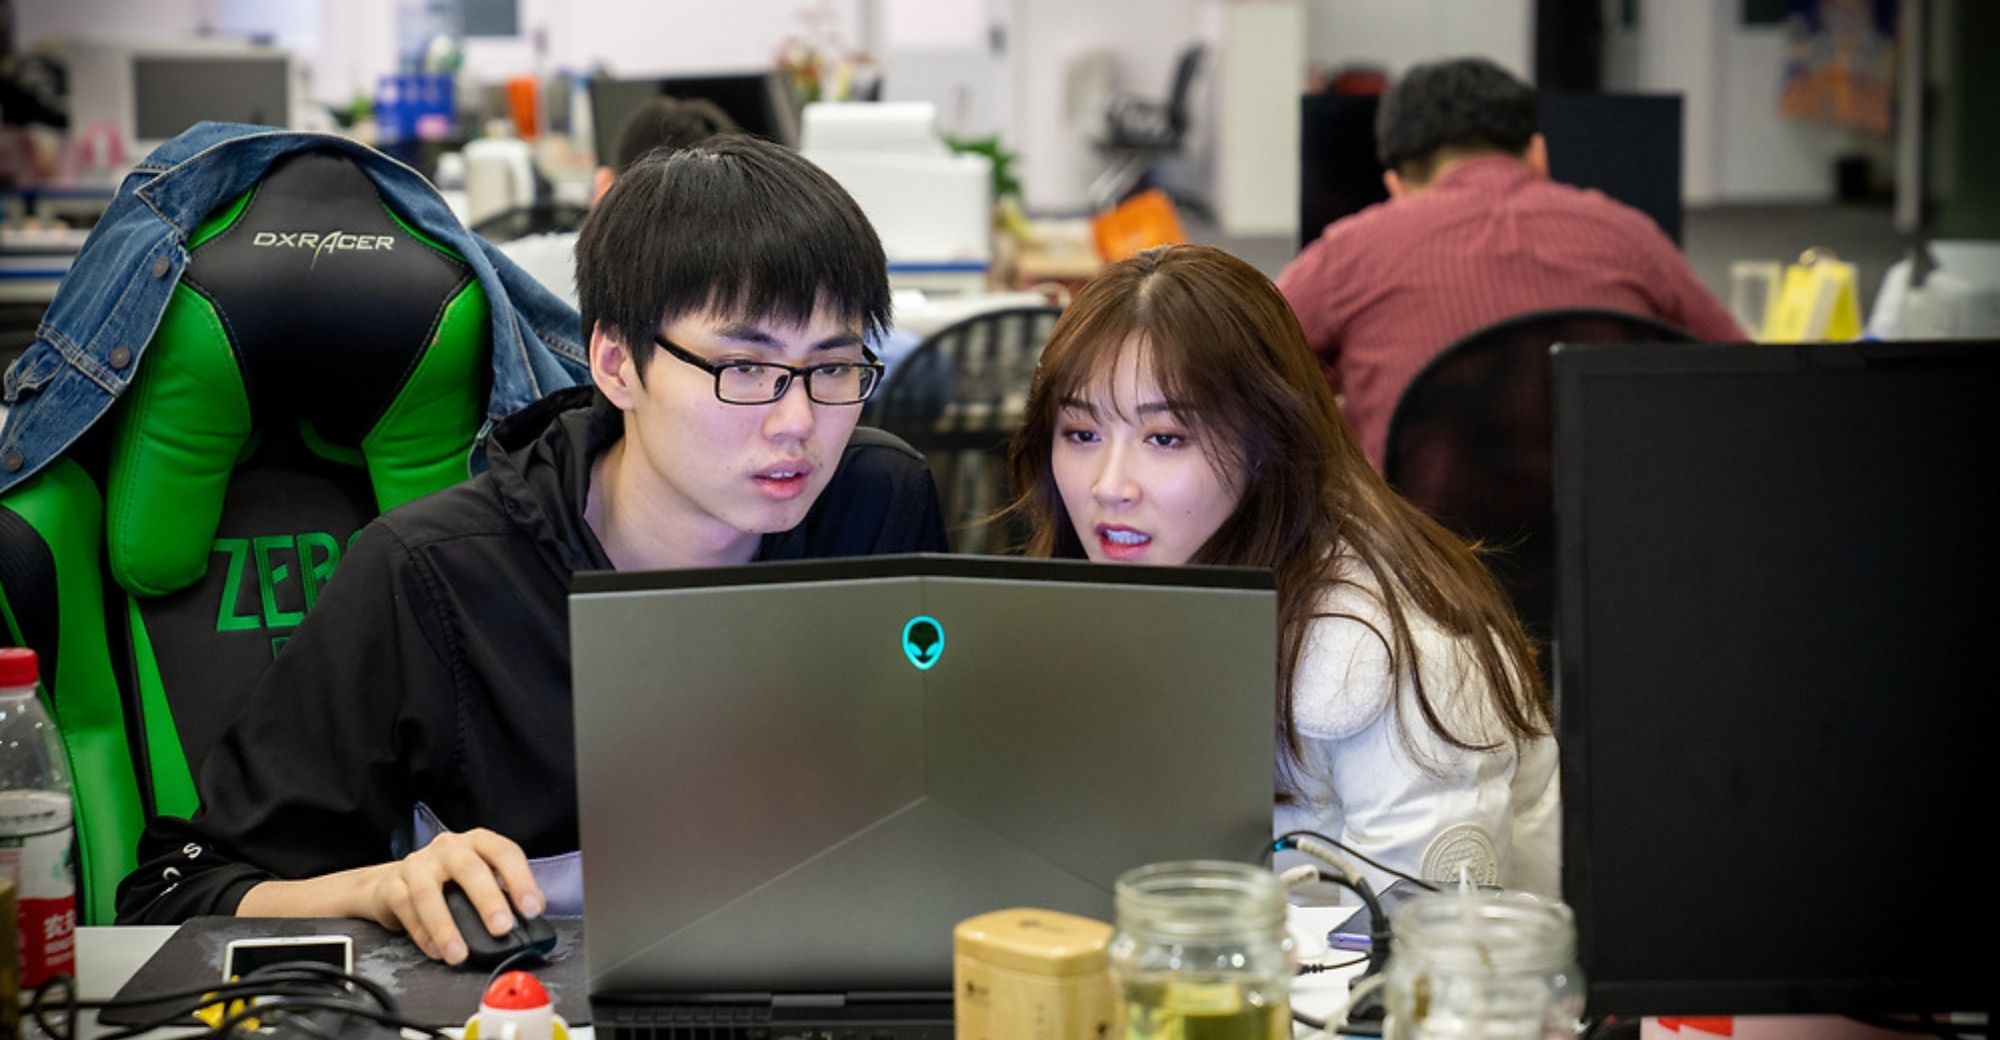 Turning Their Backs on Factories, China’s Small-Town Youths Make a Living on the Internet